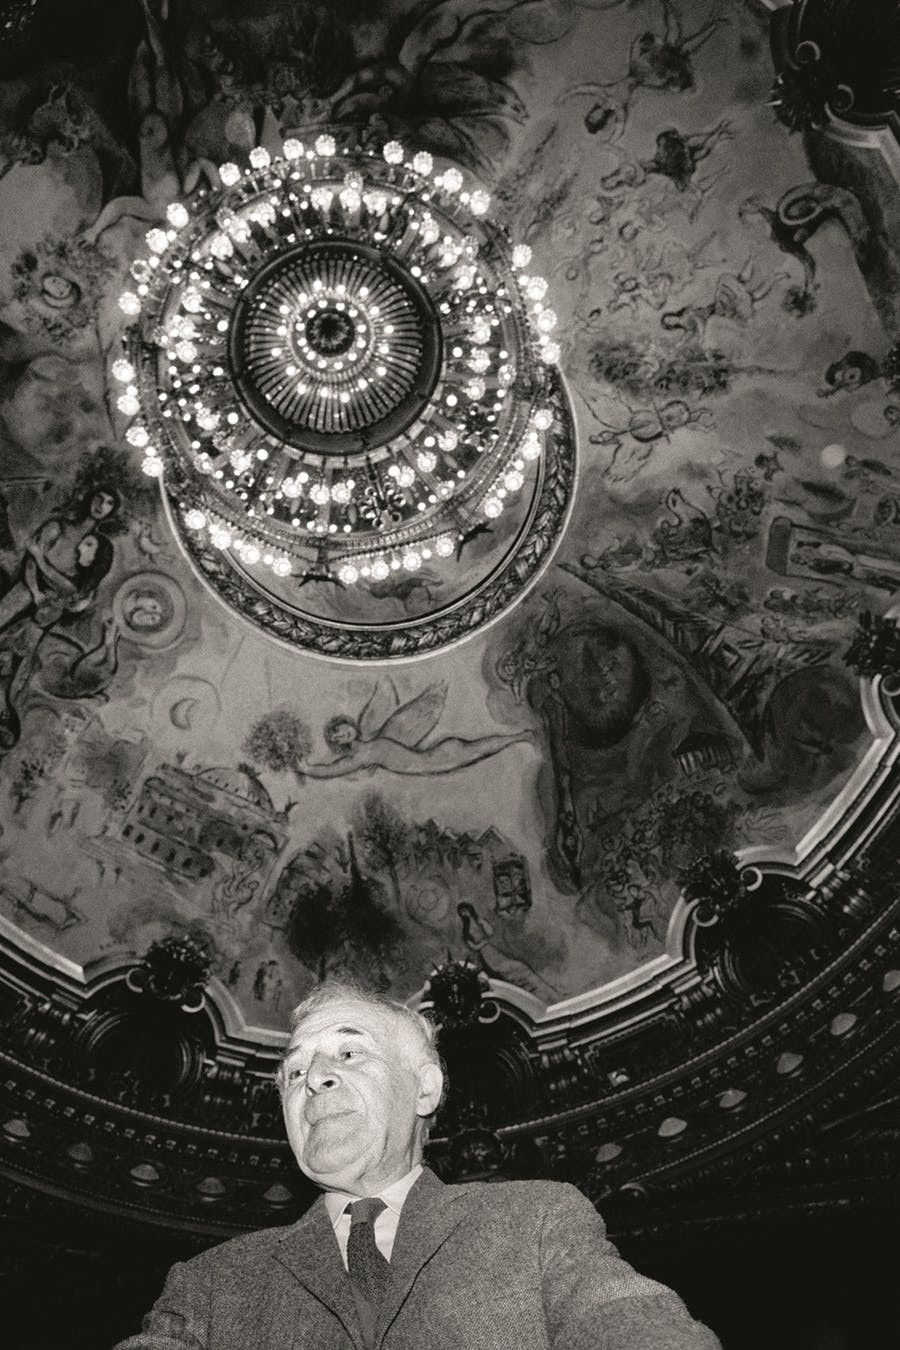 Marc Chagall and the finished work at the Paris Opera